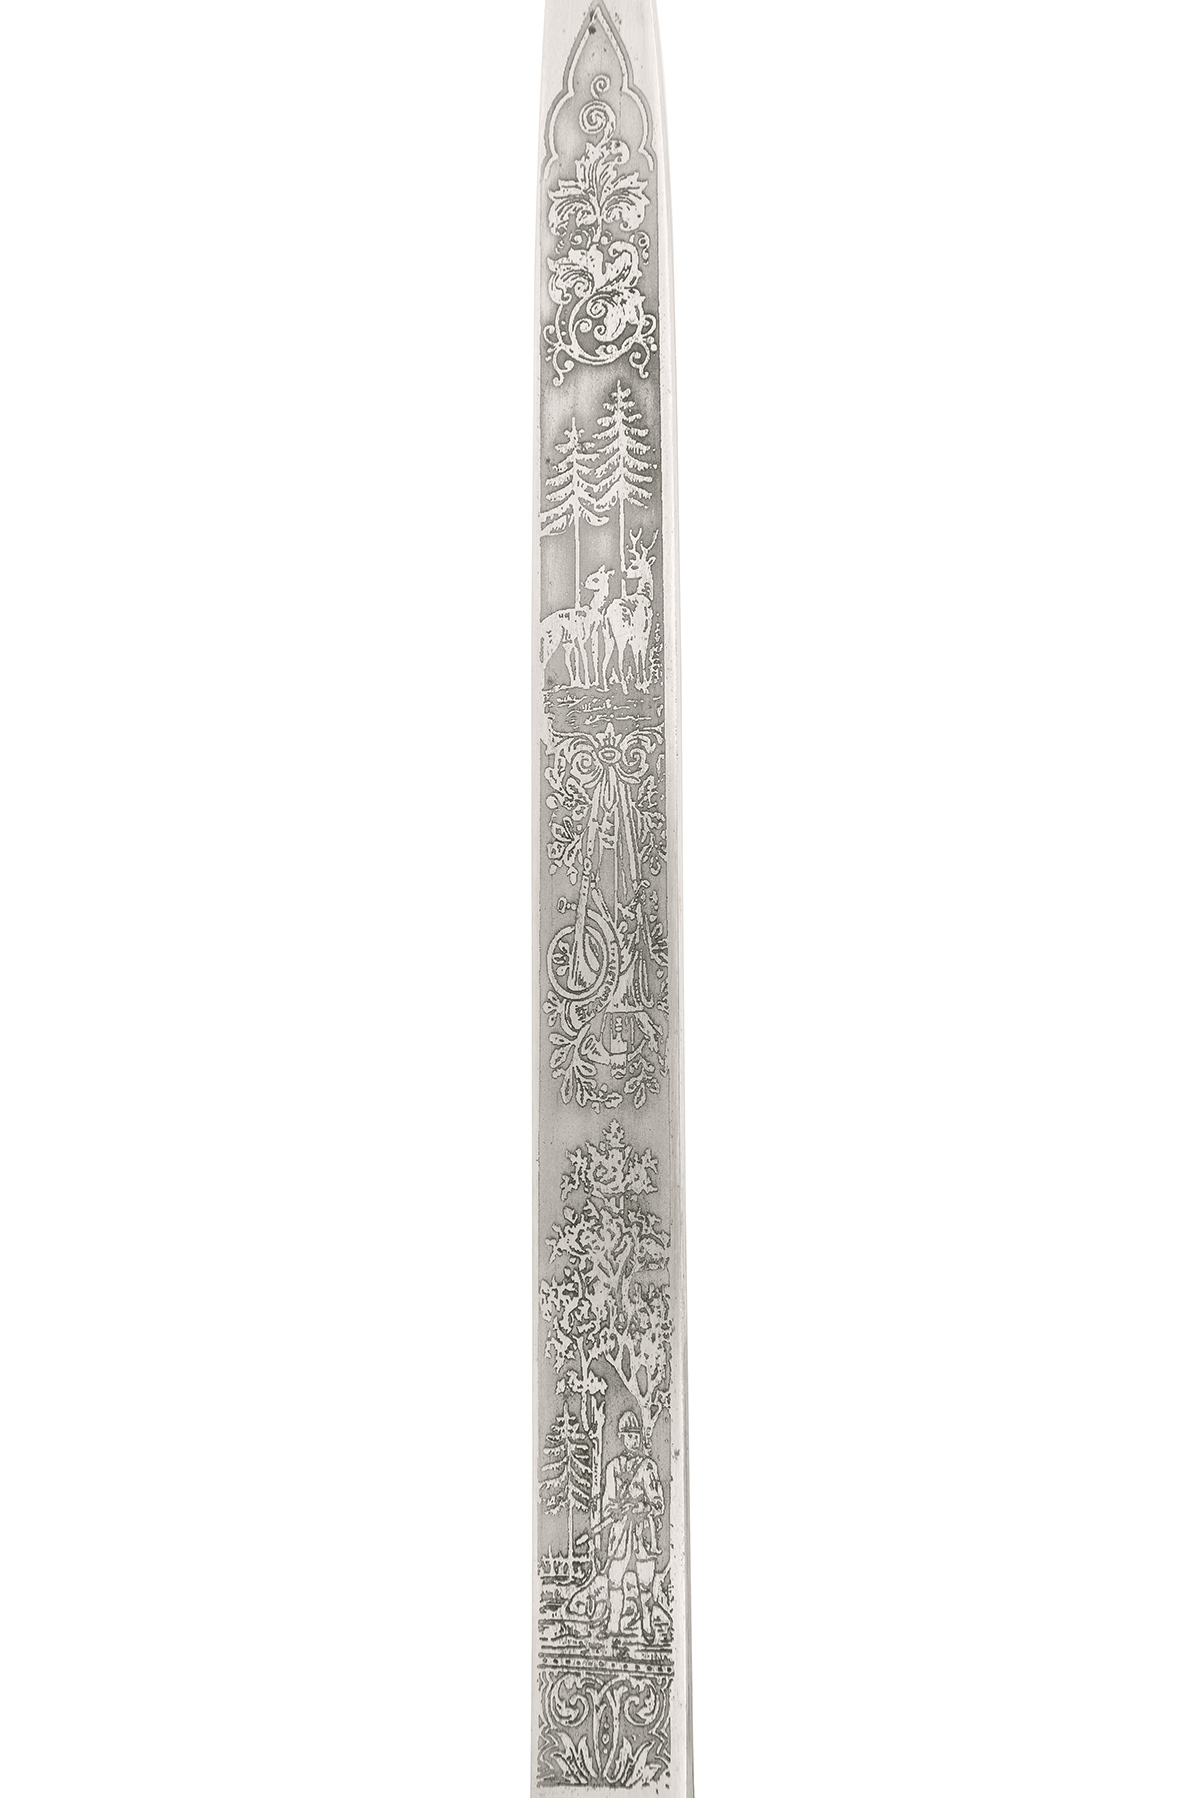 CARL EICKHORN, SOLINGEN A GERMAN HUNTING ASSOCIATION HANGER WITH ETCHED BLADE, possibly mid 1930s, - Image 3 of 5